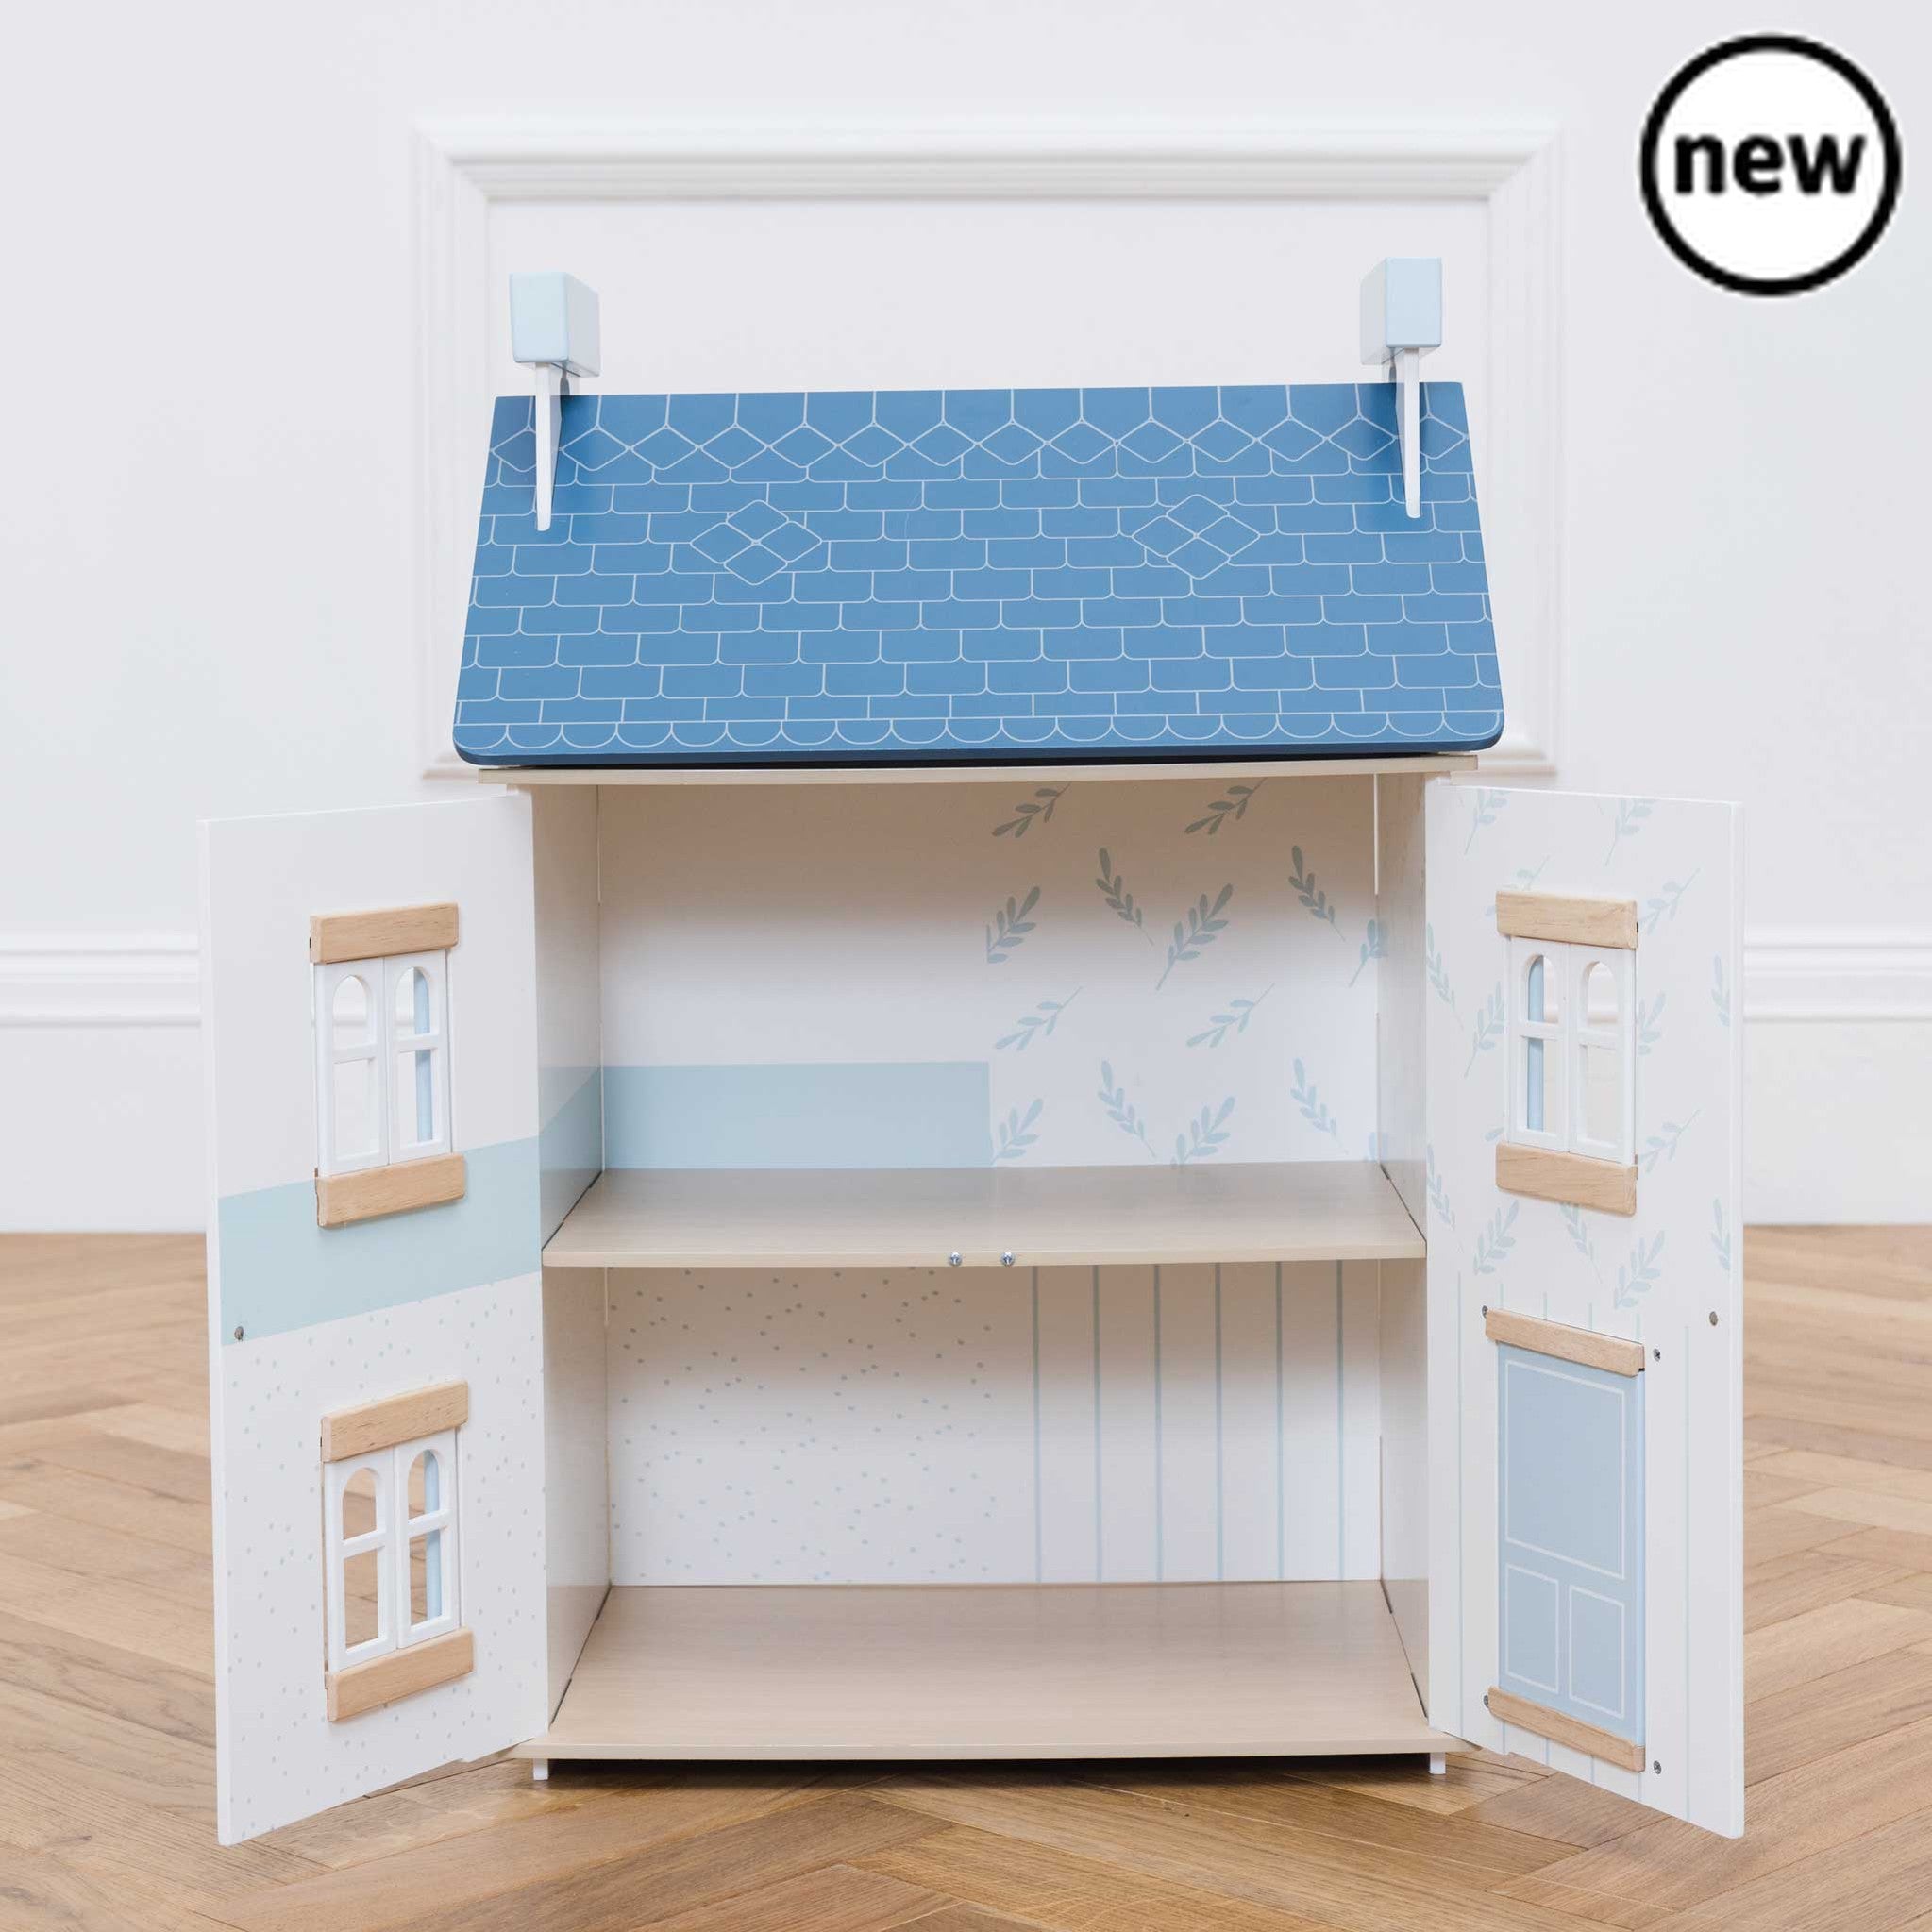 Sky House Dolls House, Description Sky House offers all the charm of a traditional wooden dolls house with an added modern luxe feel. We adore this beautiful toy, painted in muted whites with a natural wood finish and adorned with the prettiest pastel blue accents. This gem of a home is ideal for gender neutral play and makes a striking addition to the kids room. A cosy place for miniature friends to explore. This sweet home encourages creative role play and helps with those vital co-ordination skills, for 